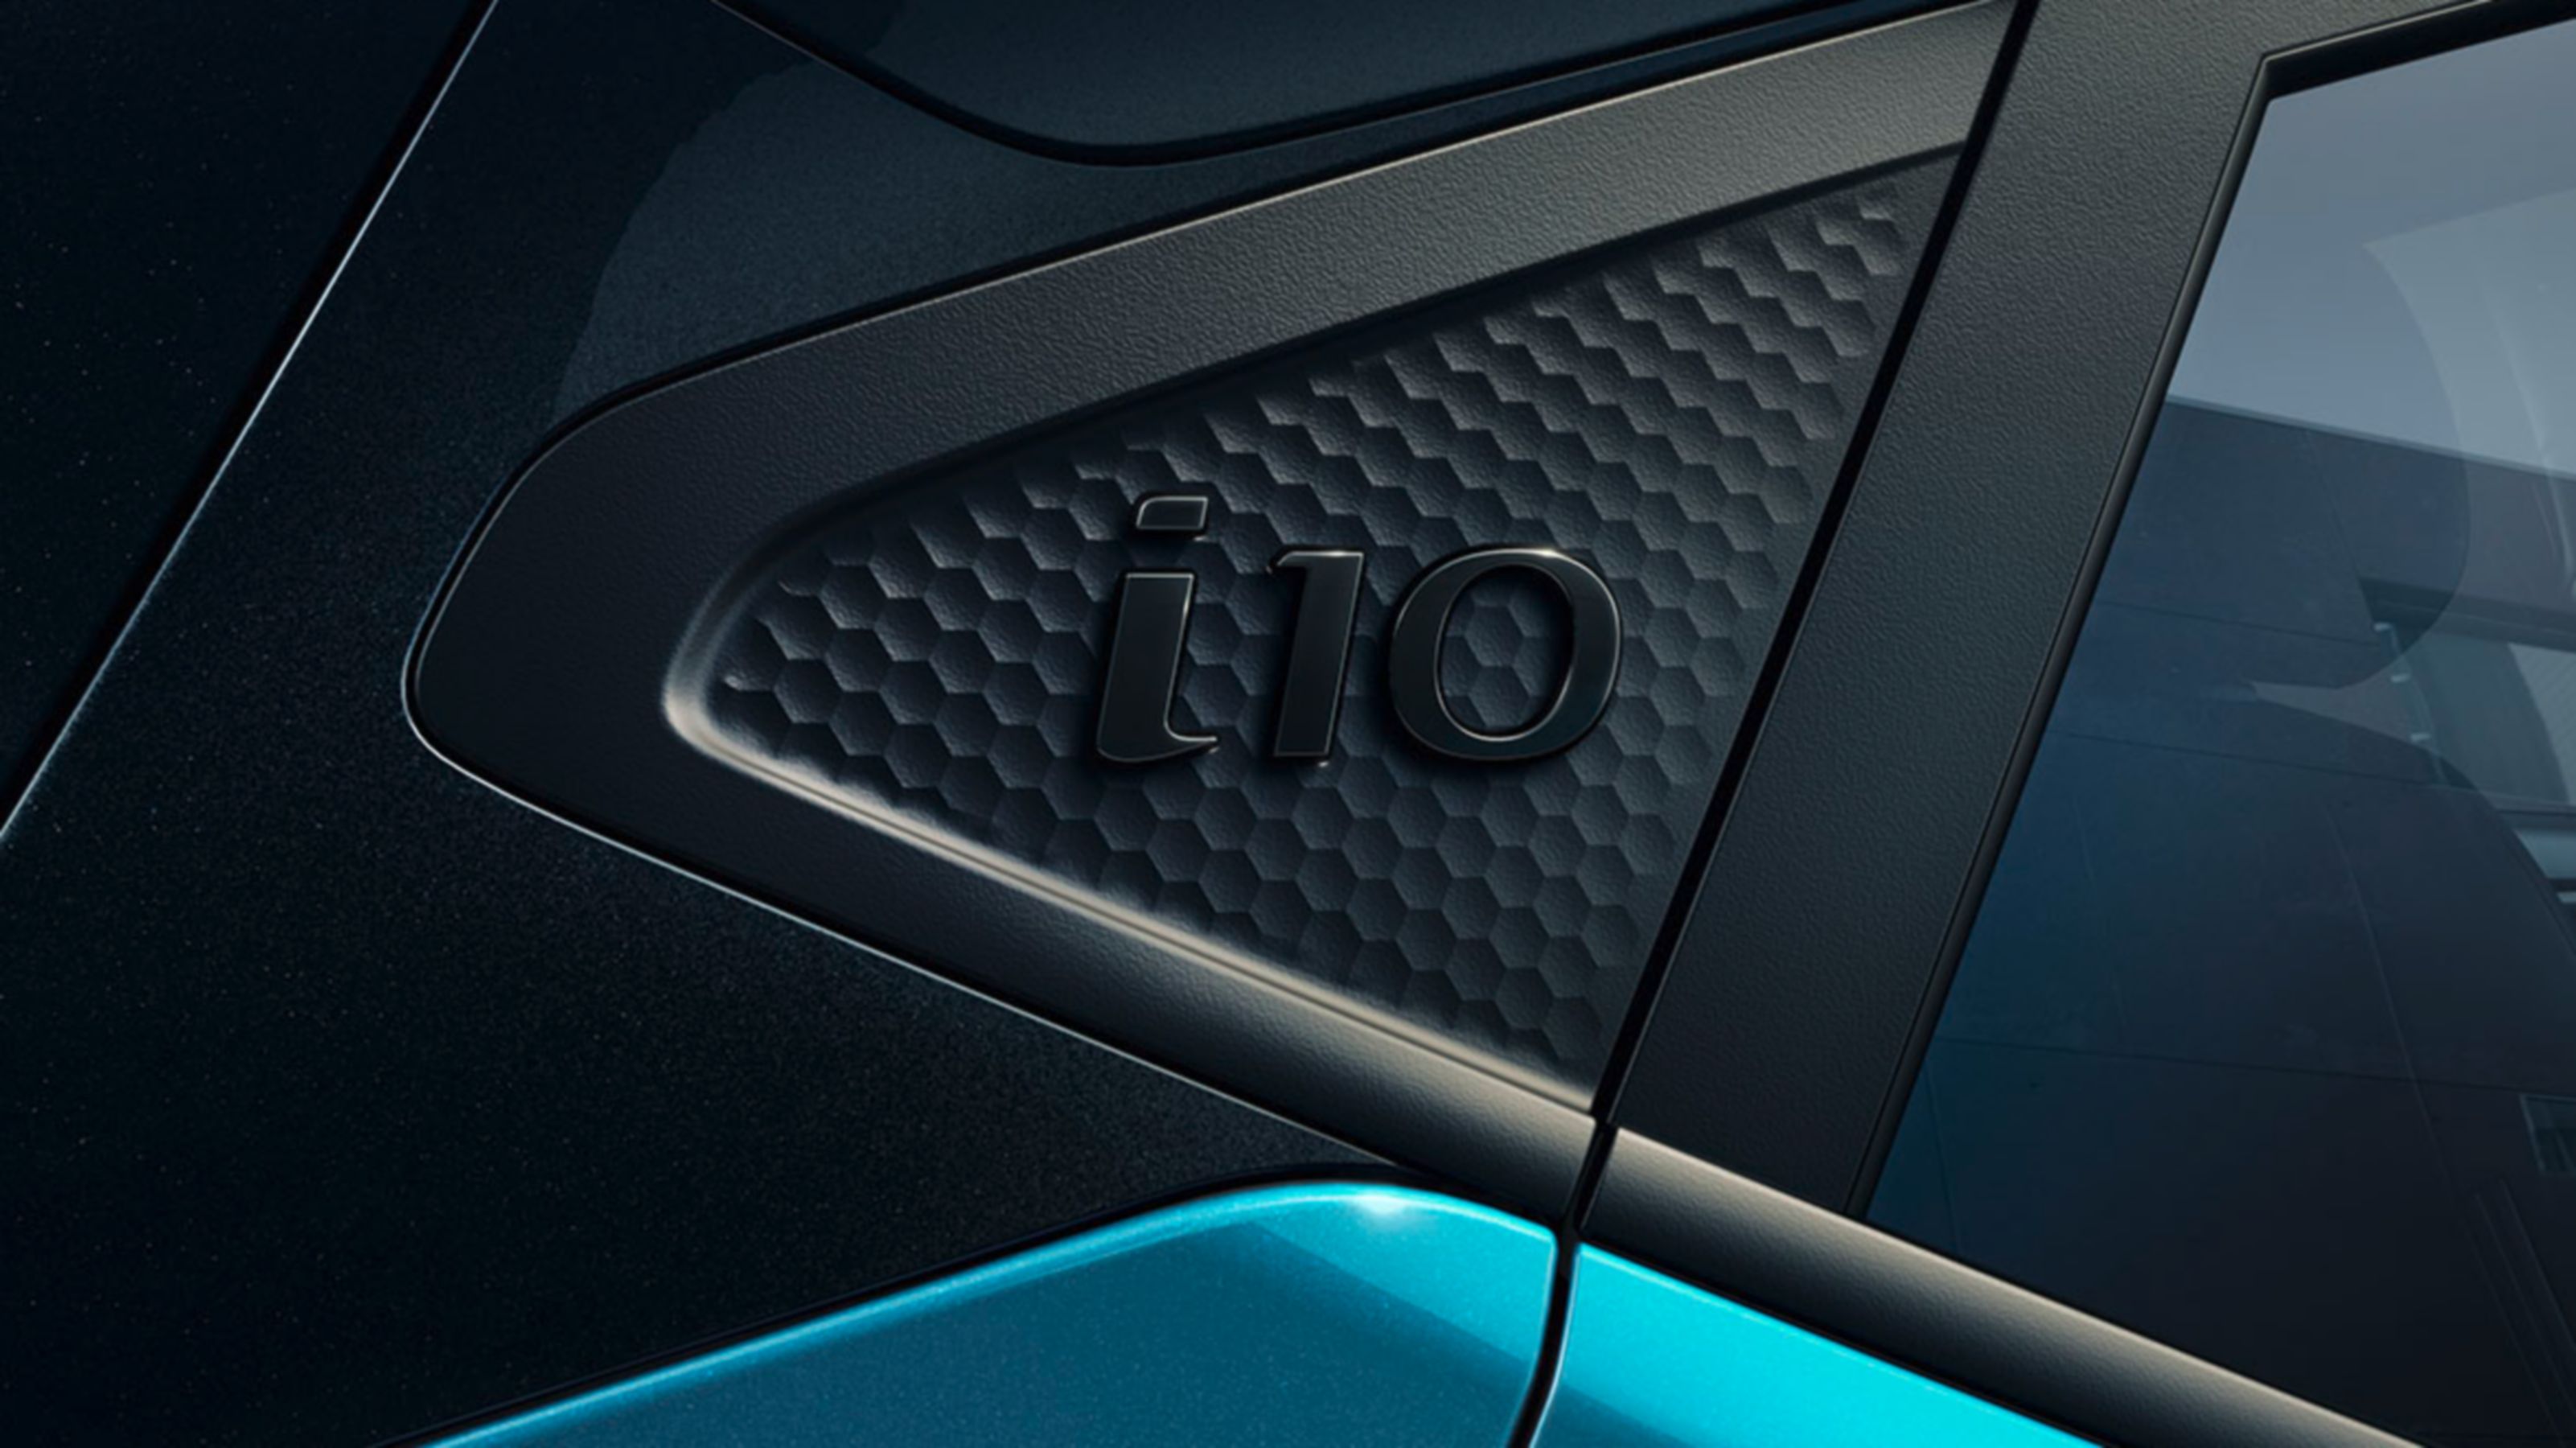 The one-of-a-kind design of the i10 logo on the Hyundai i10.